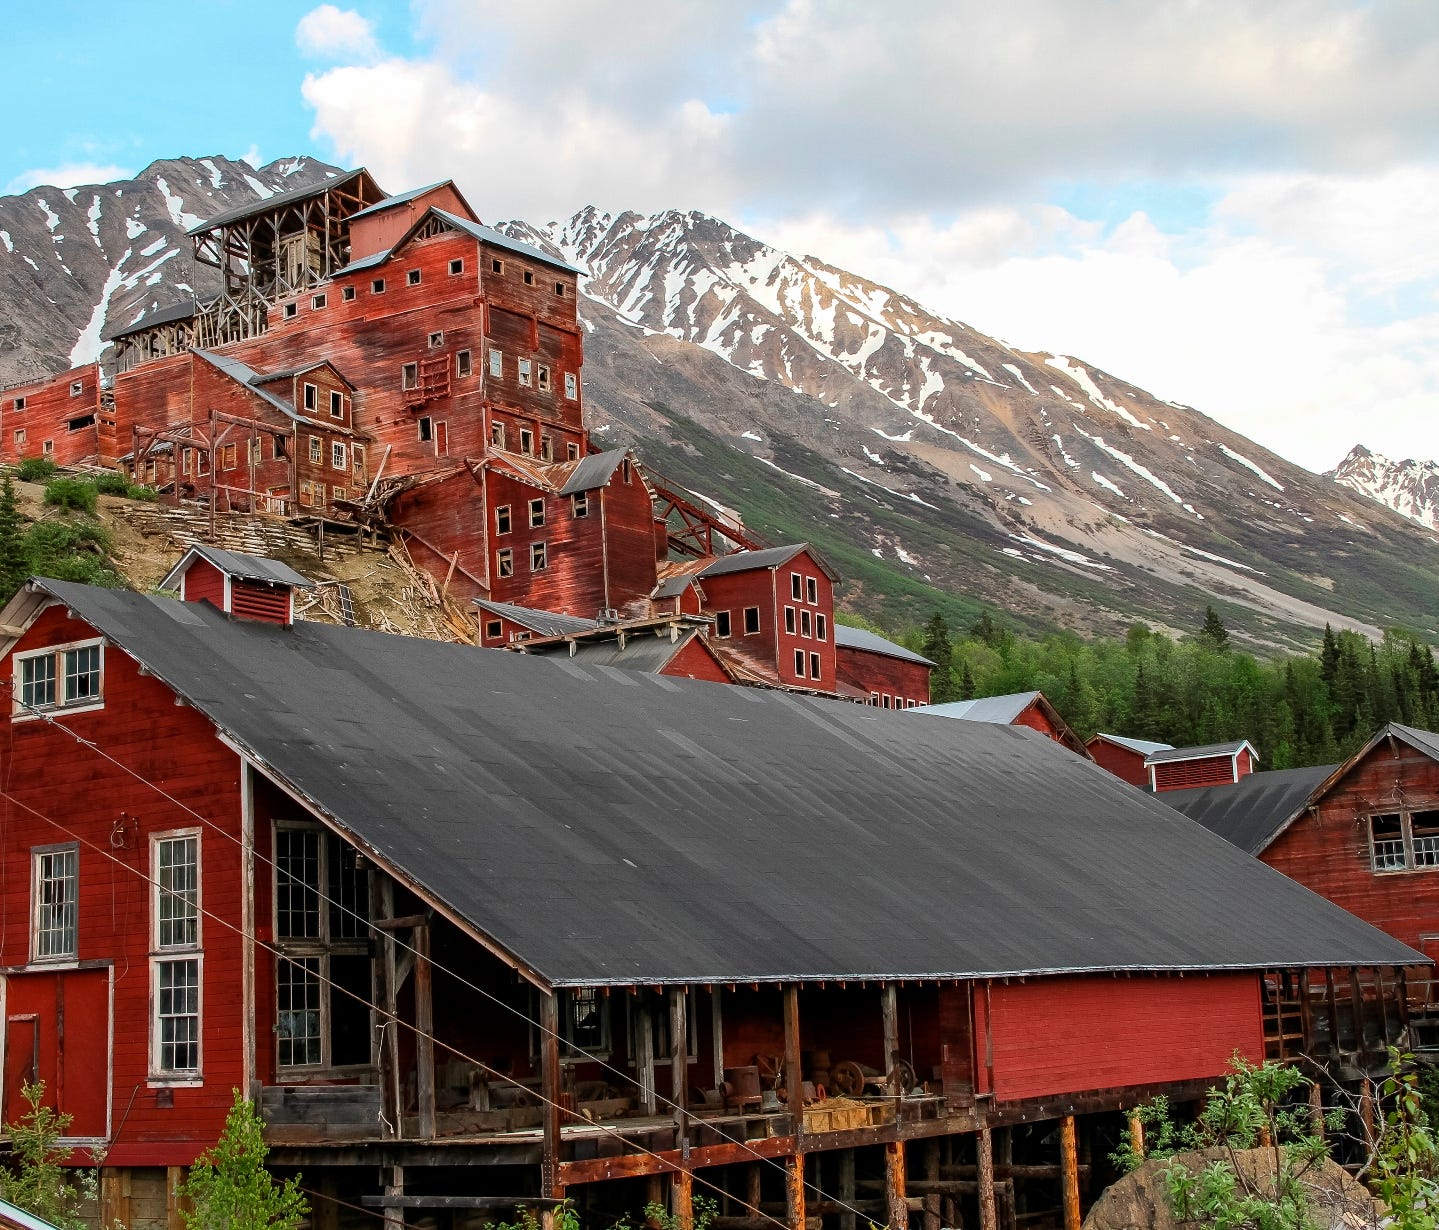 Copper mining created Kennecott, Alaska, and soon after the vein ran out in 1938, the town did too. Now a National Historic Landmark, it's managed by Wrangell-St. Elias National Park and Preserve.